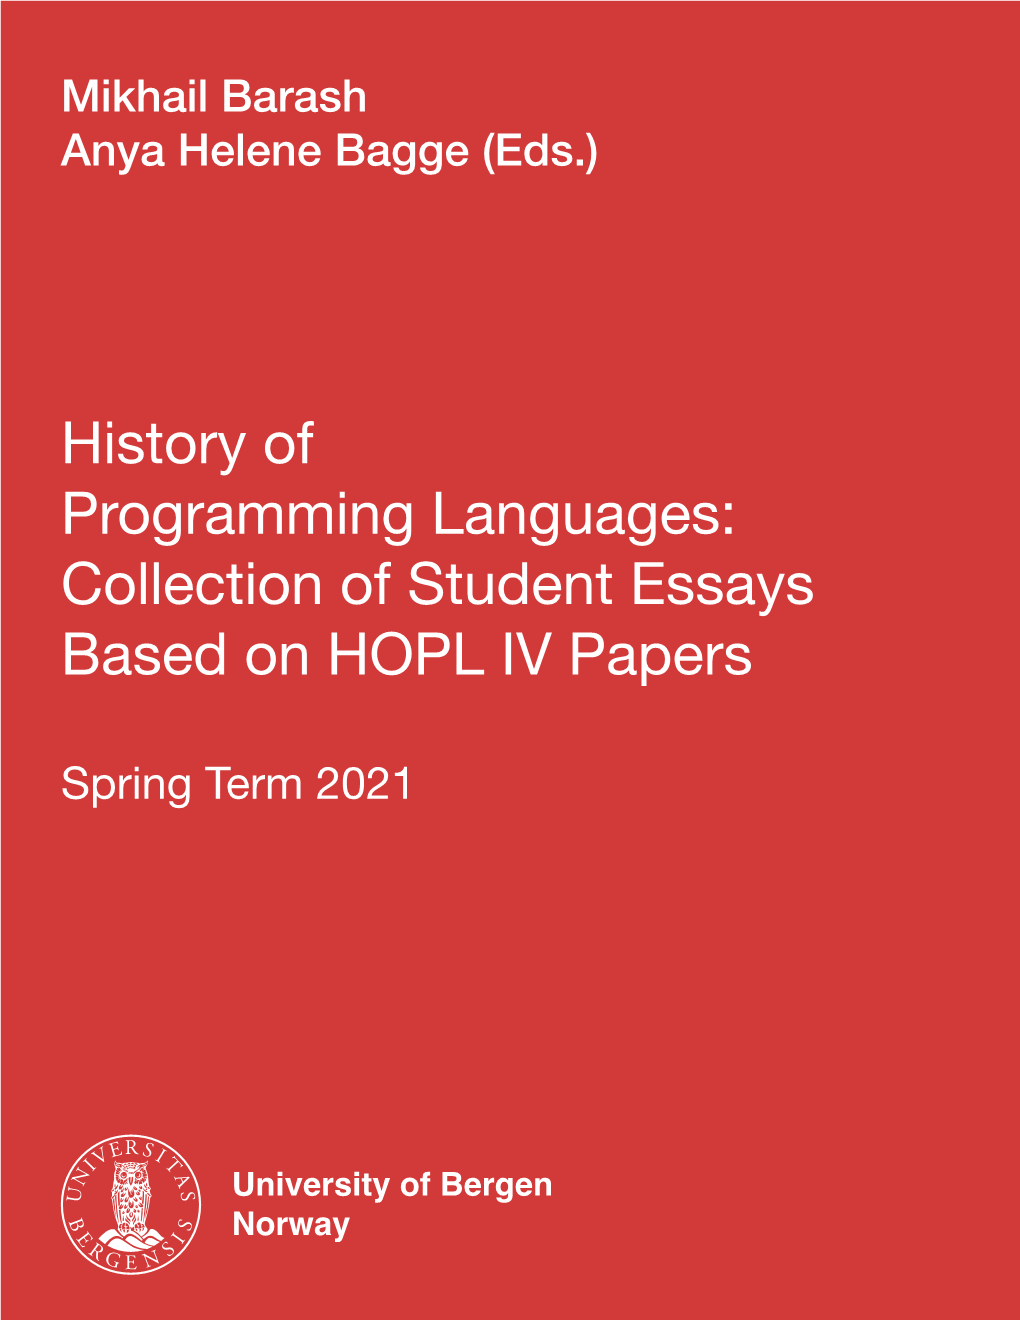 History of Programming Languages: Collection of Student Essays Based on HOPL IV Papers